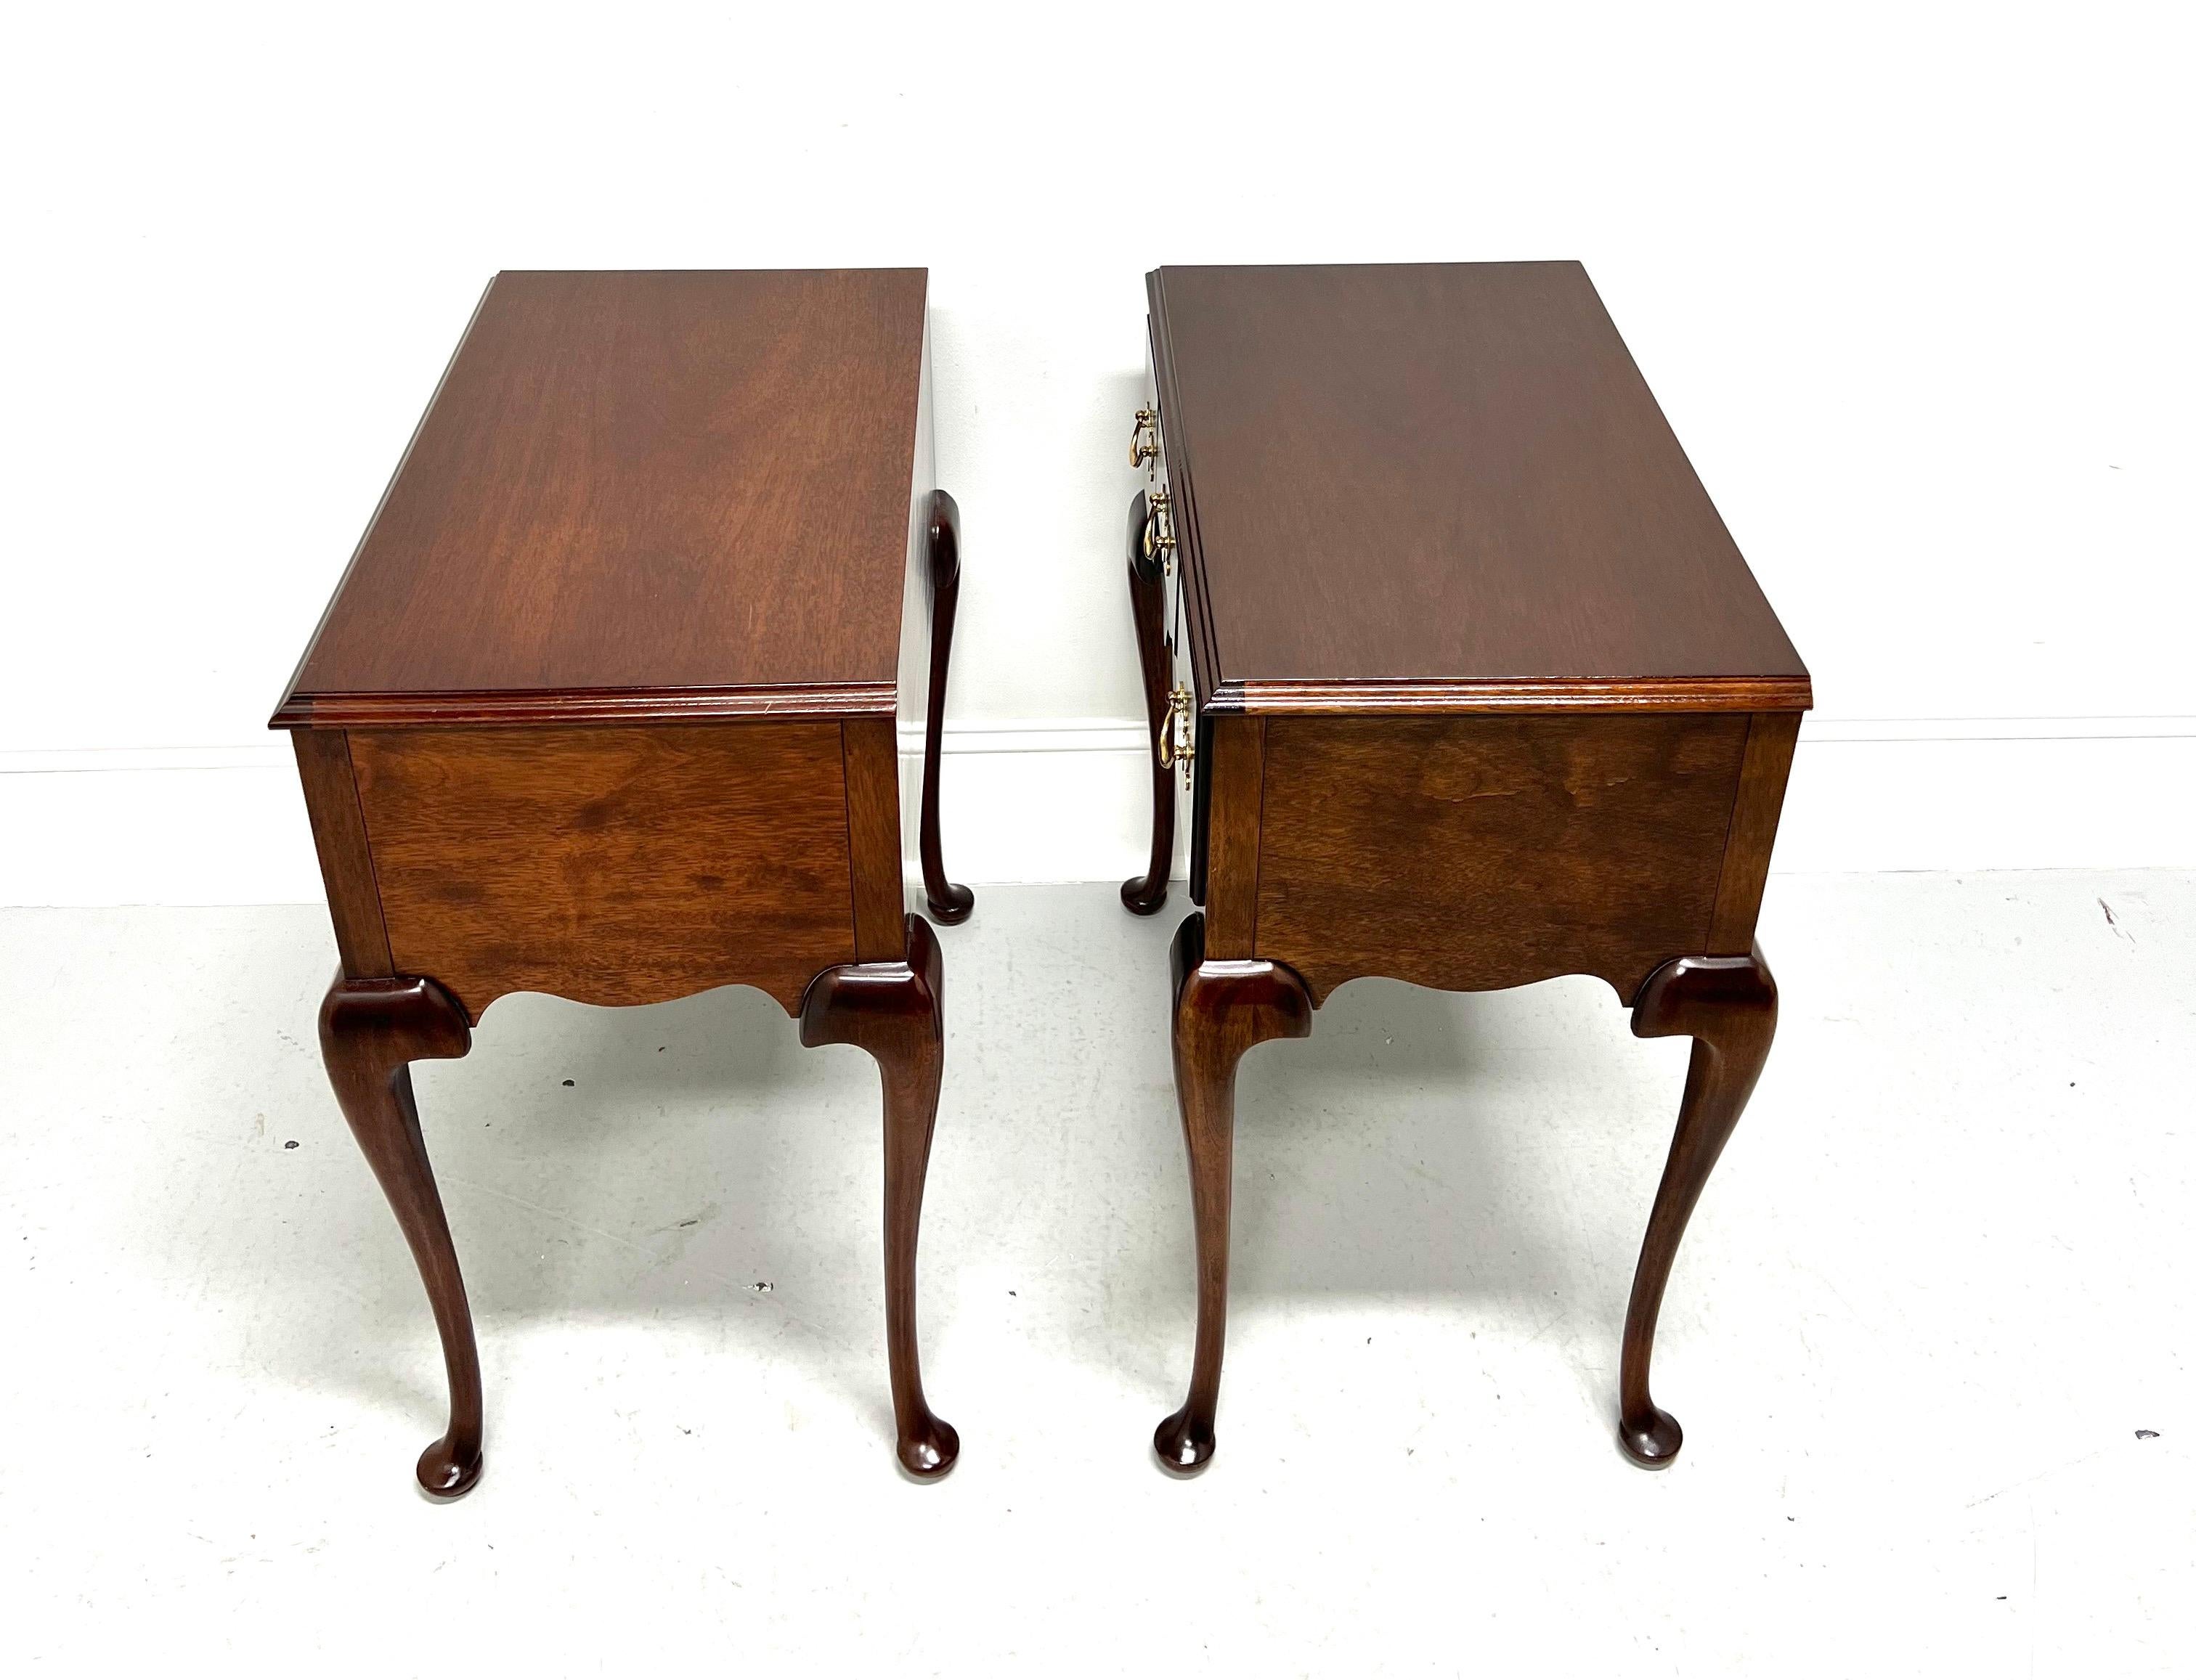 20th Century MADISON SQUARE Mahogany Queen Anne Lowboy Style Bedside / Side Tables - Pair